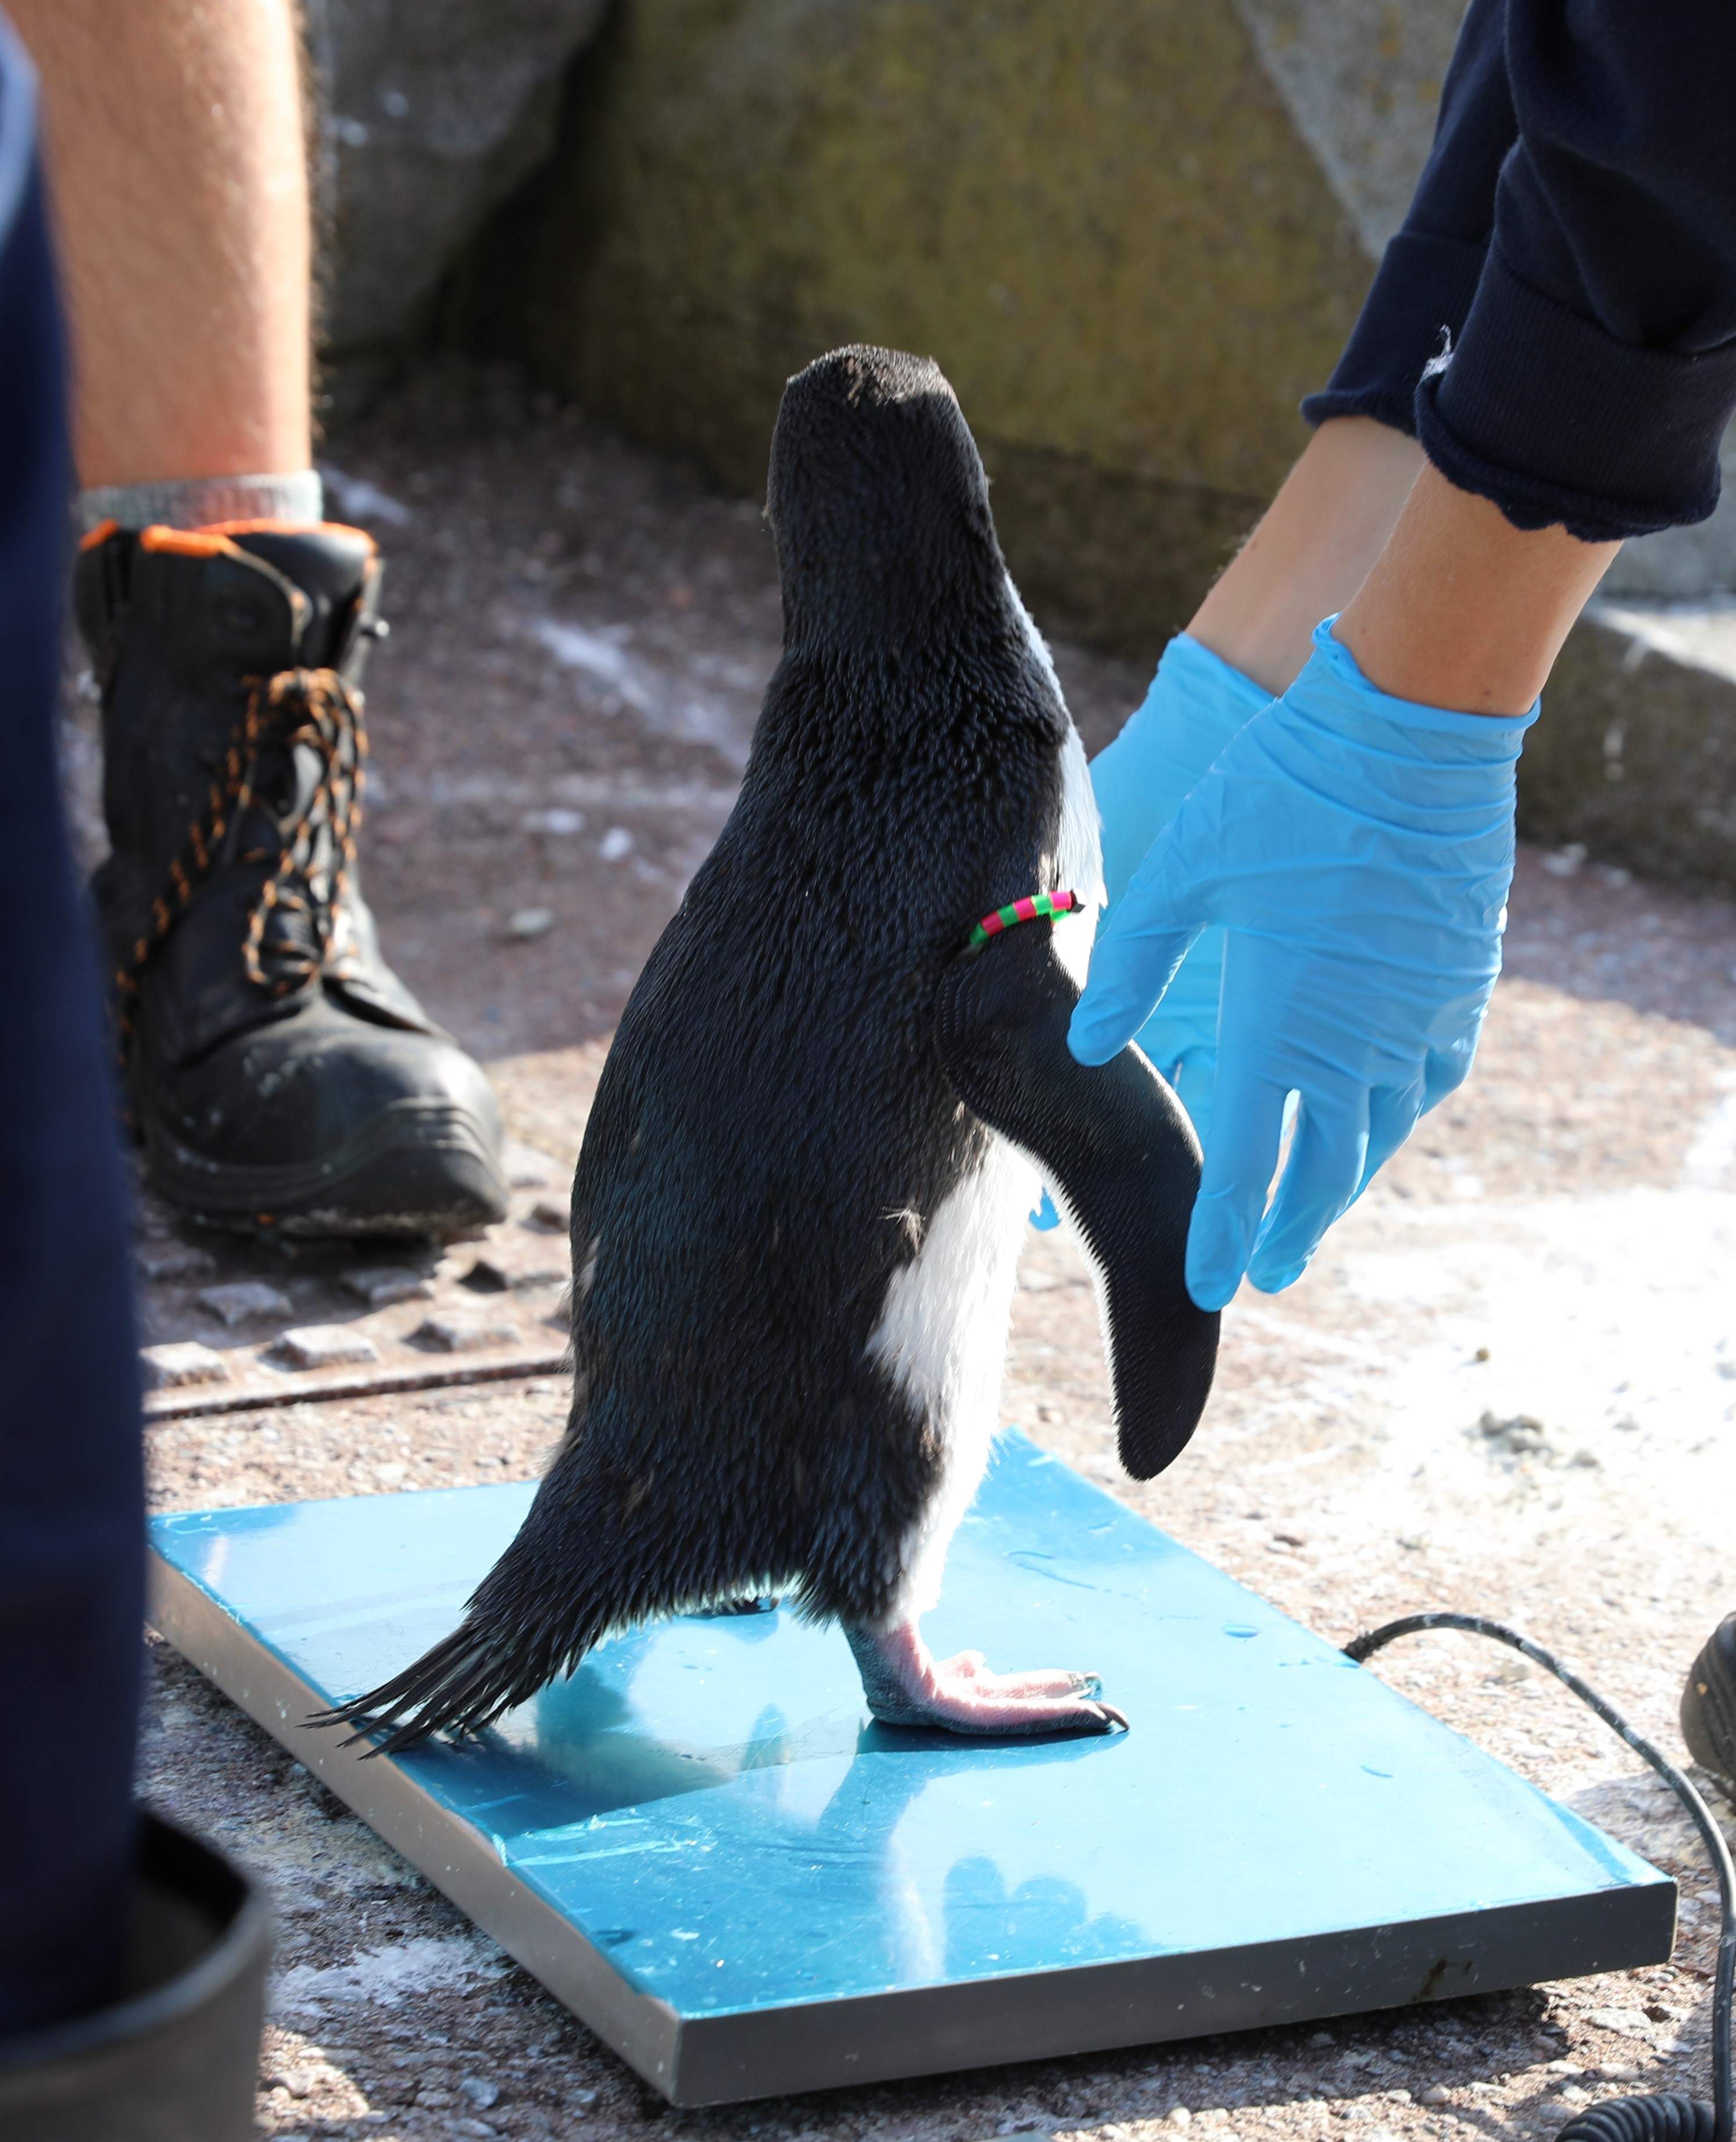 Gentoo penguin chick being weighed as part of health check by vets and keepers

Image: AMY MIDDLETON 2023